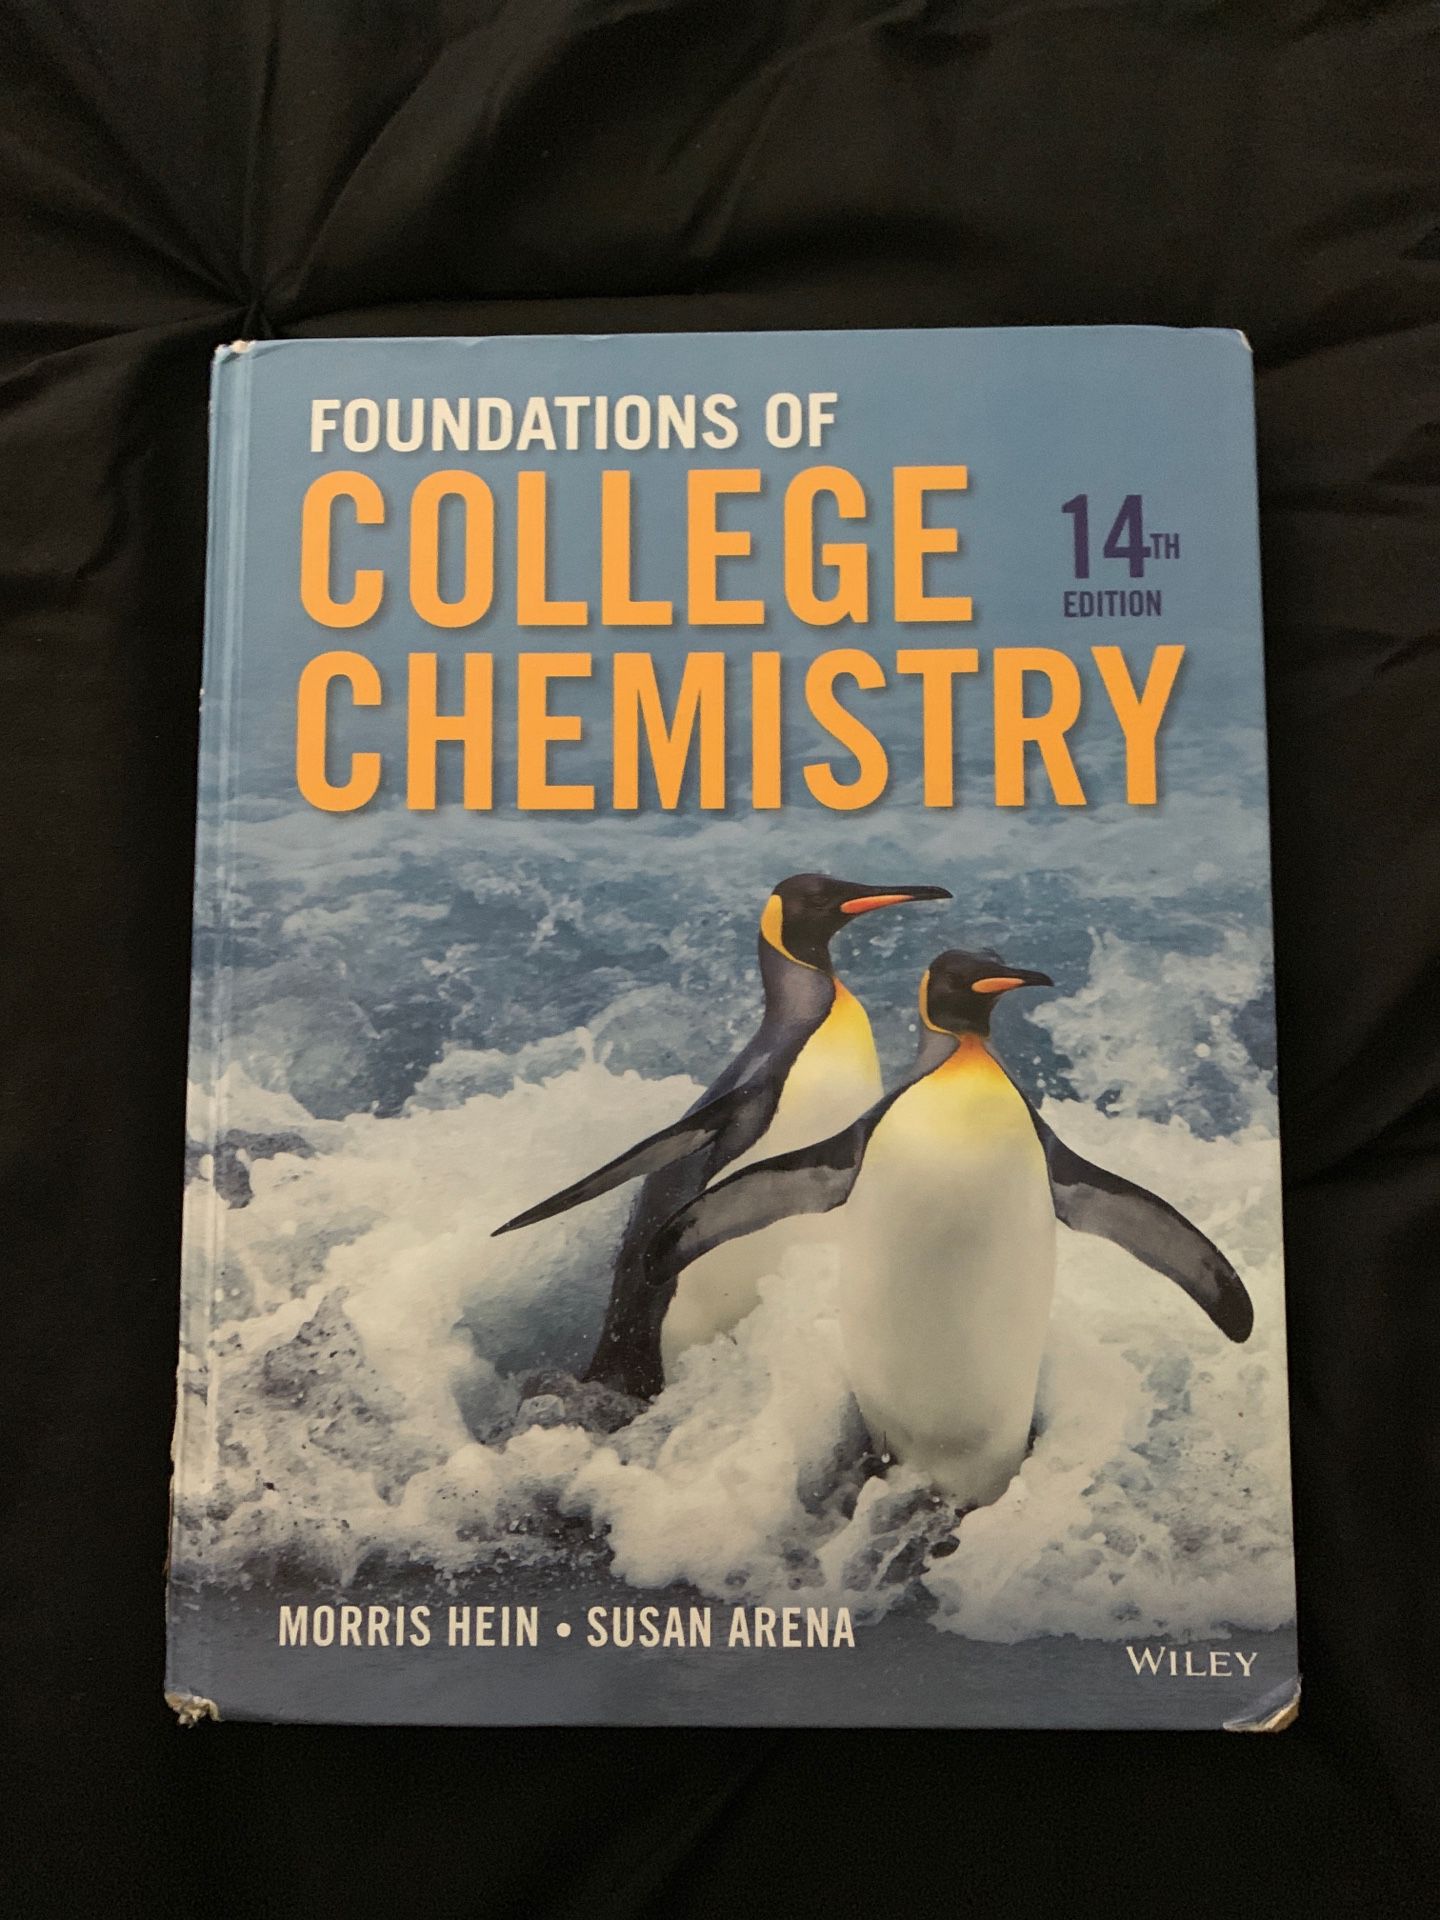 College Chemistry 14th Edition by Morris Hein, Wiley